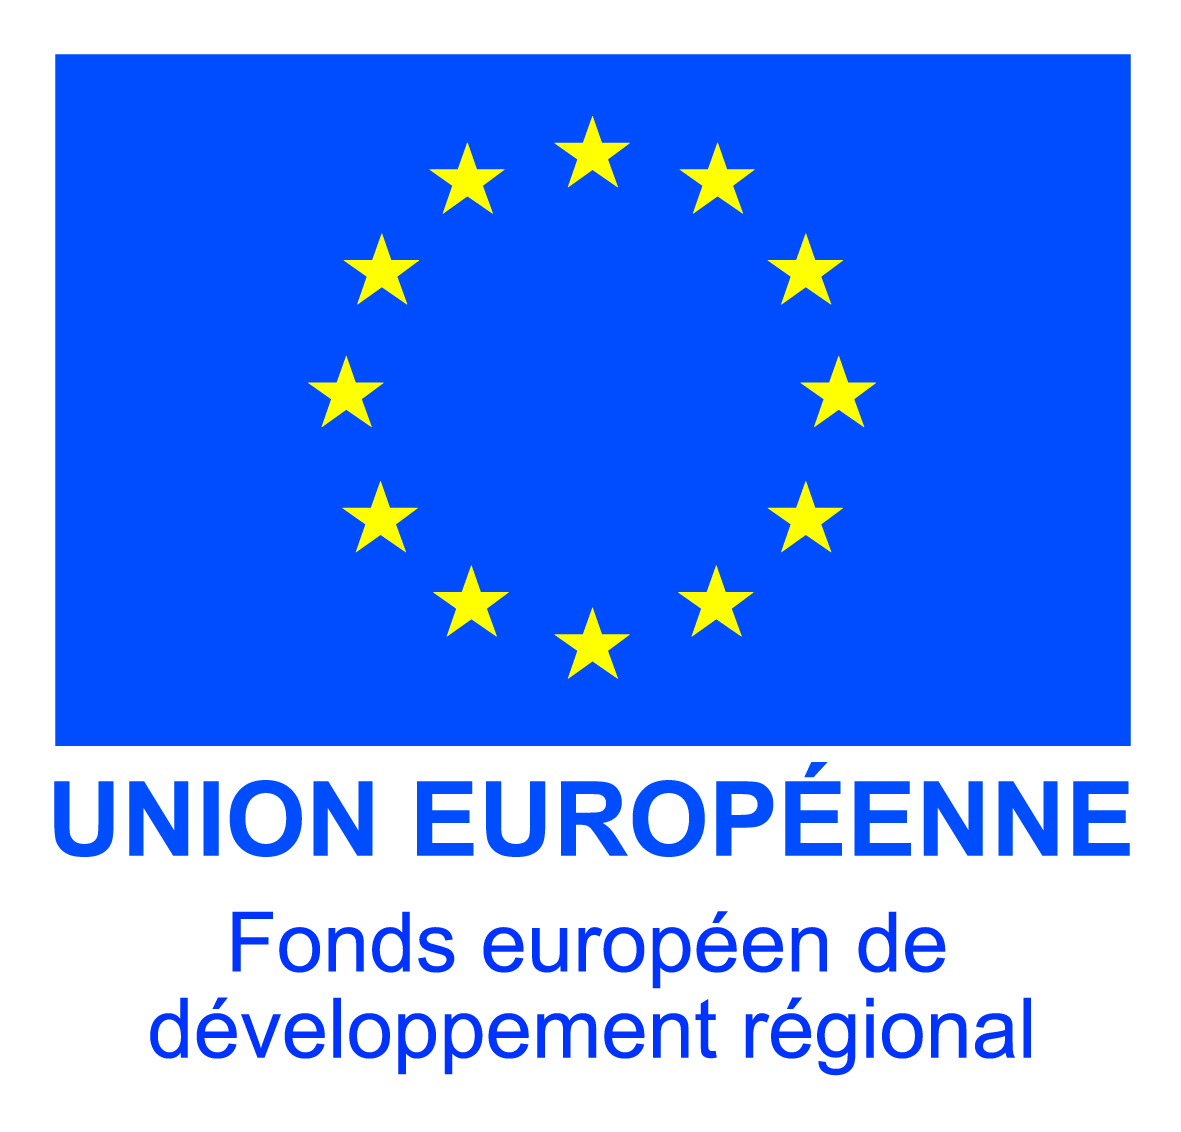 Funding from the normandie region and the european union to develop 